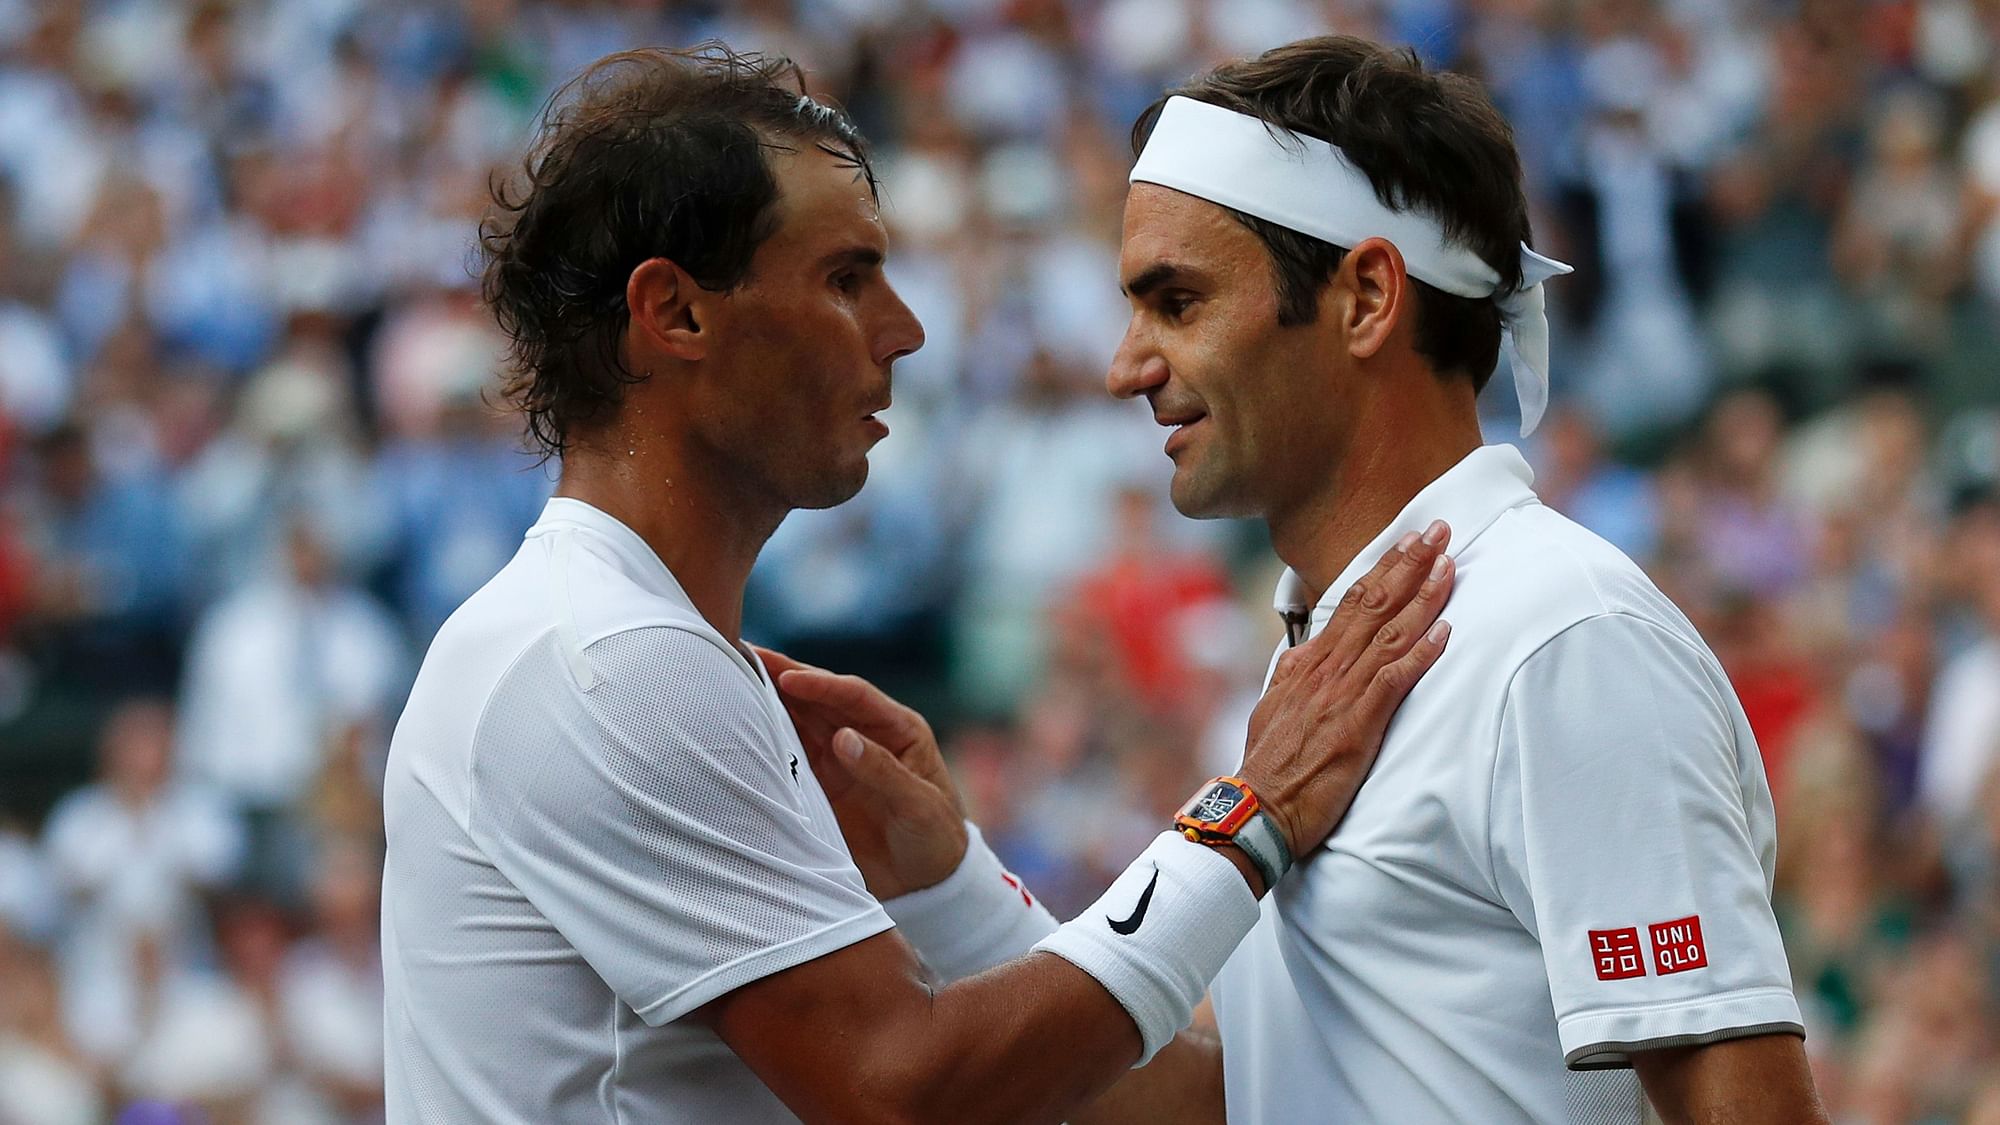 Roger Federer defeated Rafael Nadal 7-6 (3), 1-6, 6-3, 6-4 in a hard-fought semi-final at the Wimbledon on Friday.